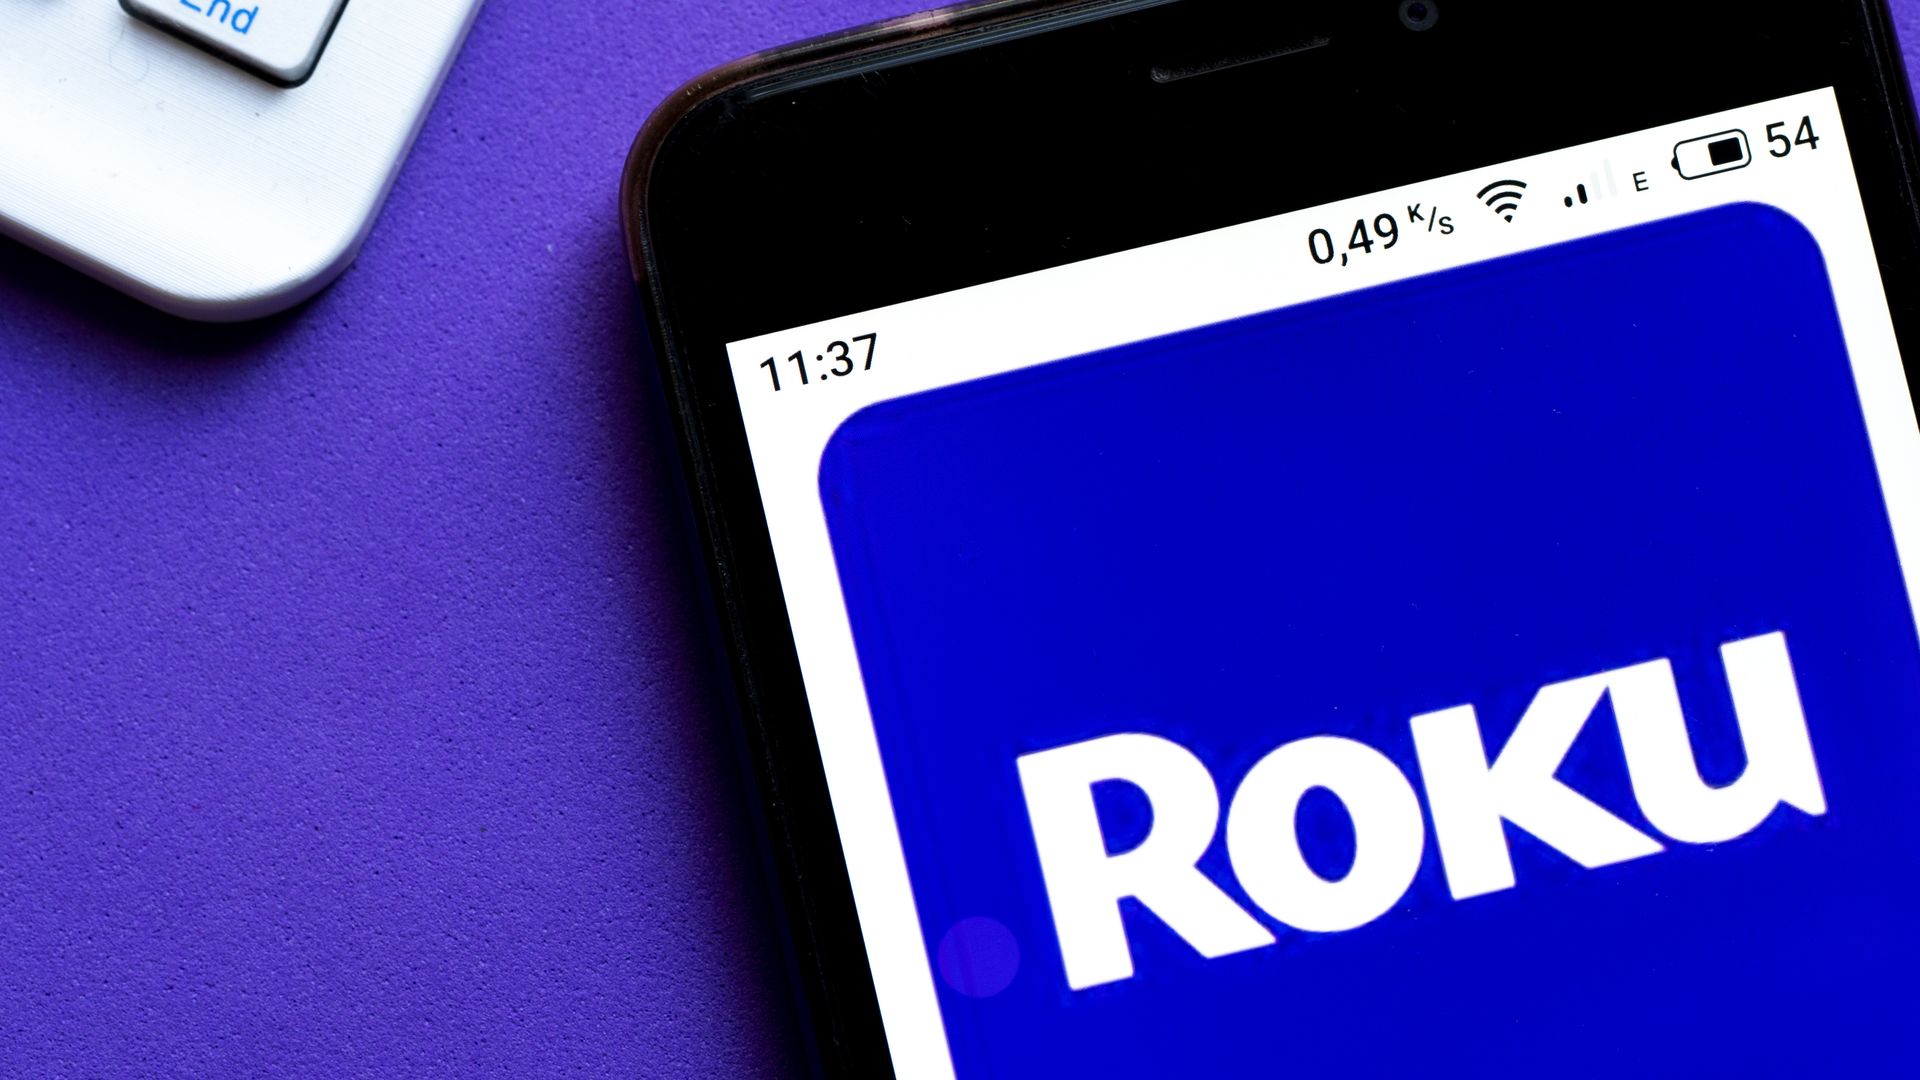 The Roku Channel is now available as a Google TV app